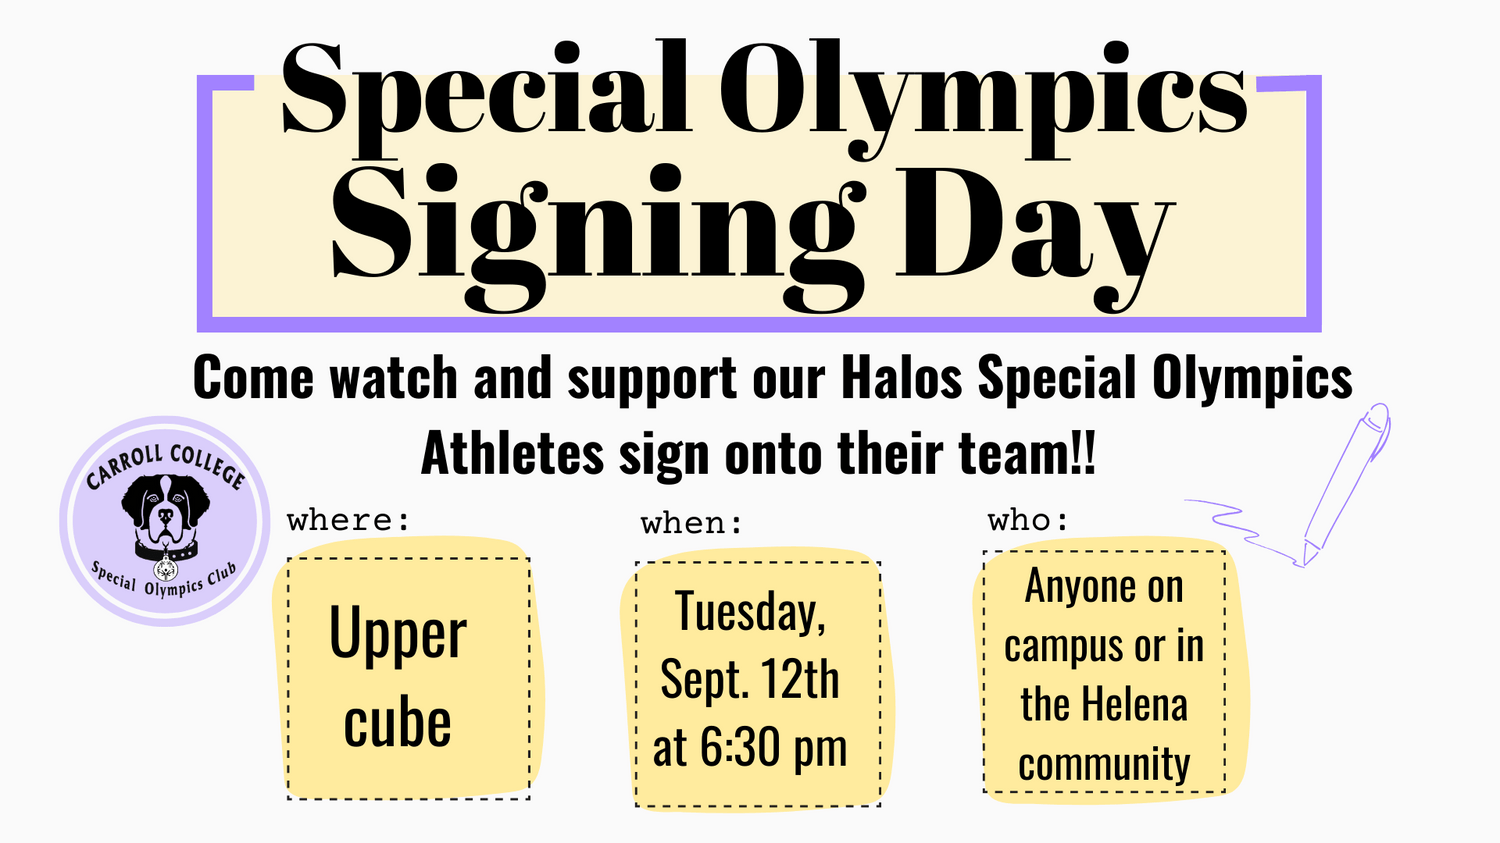 Special Olympics Signing Day